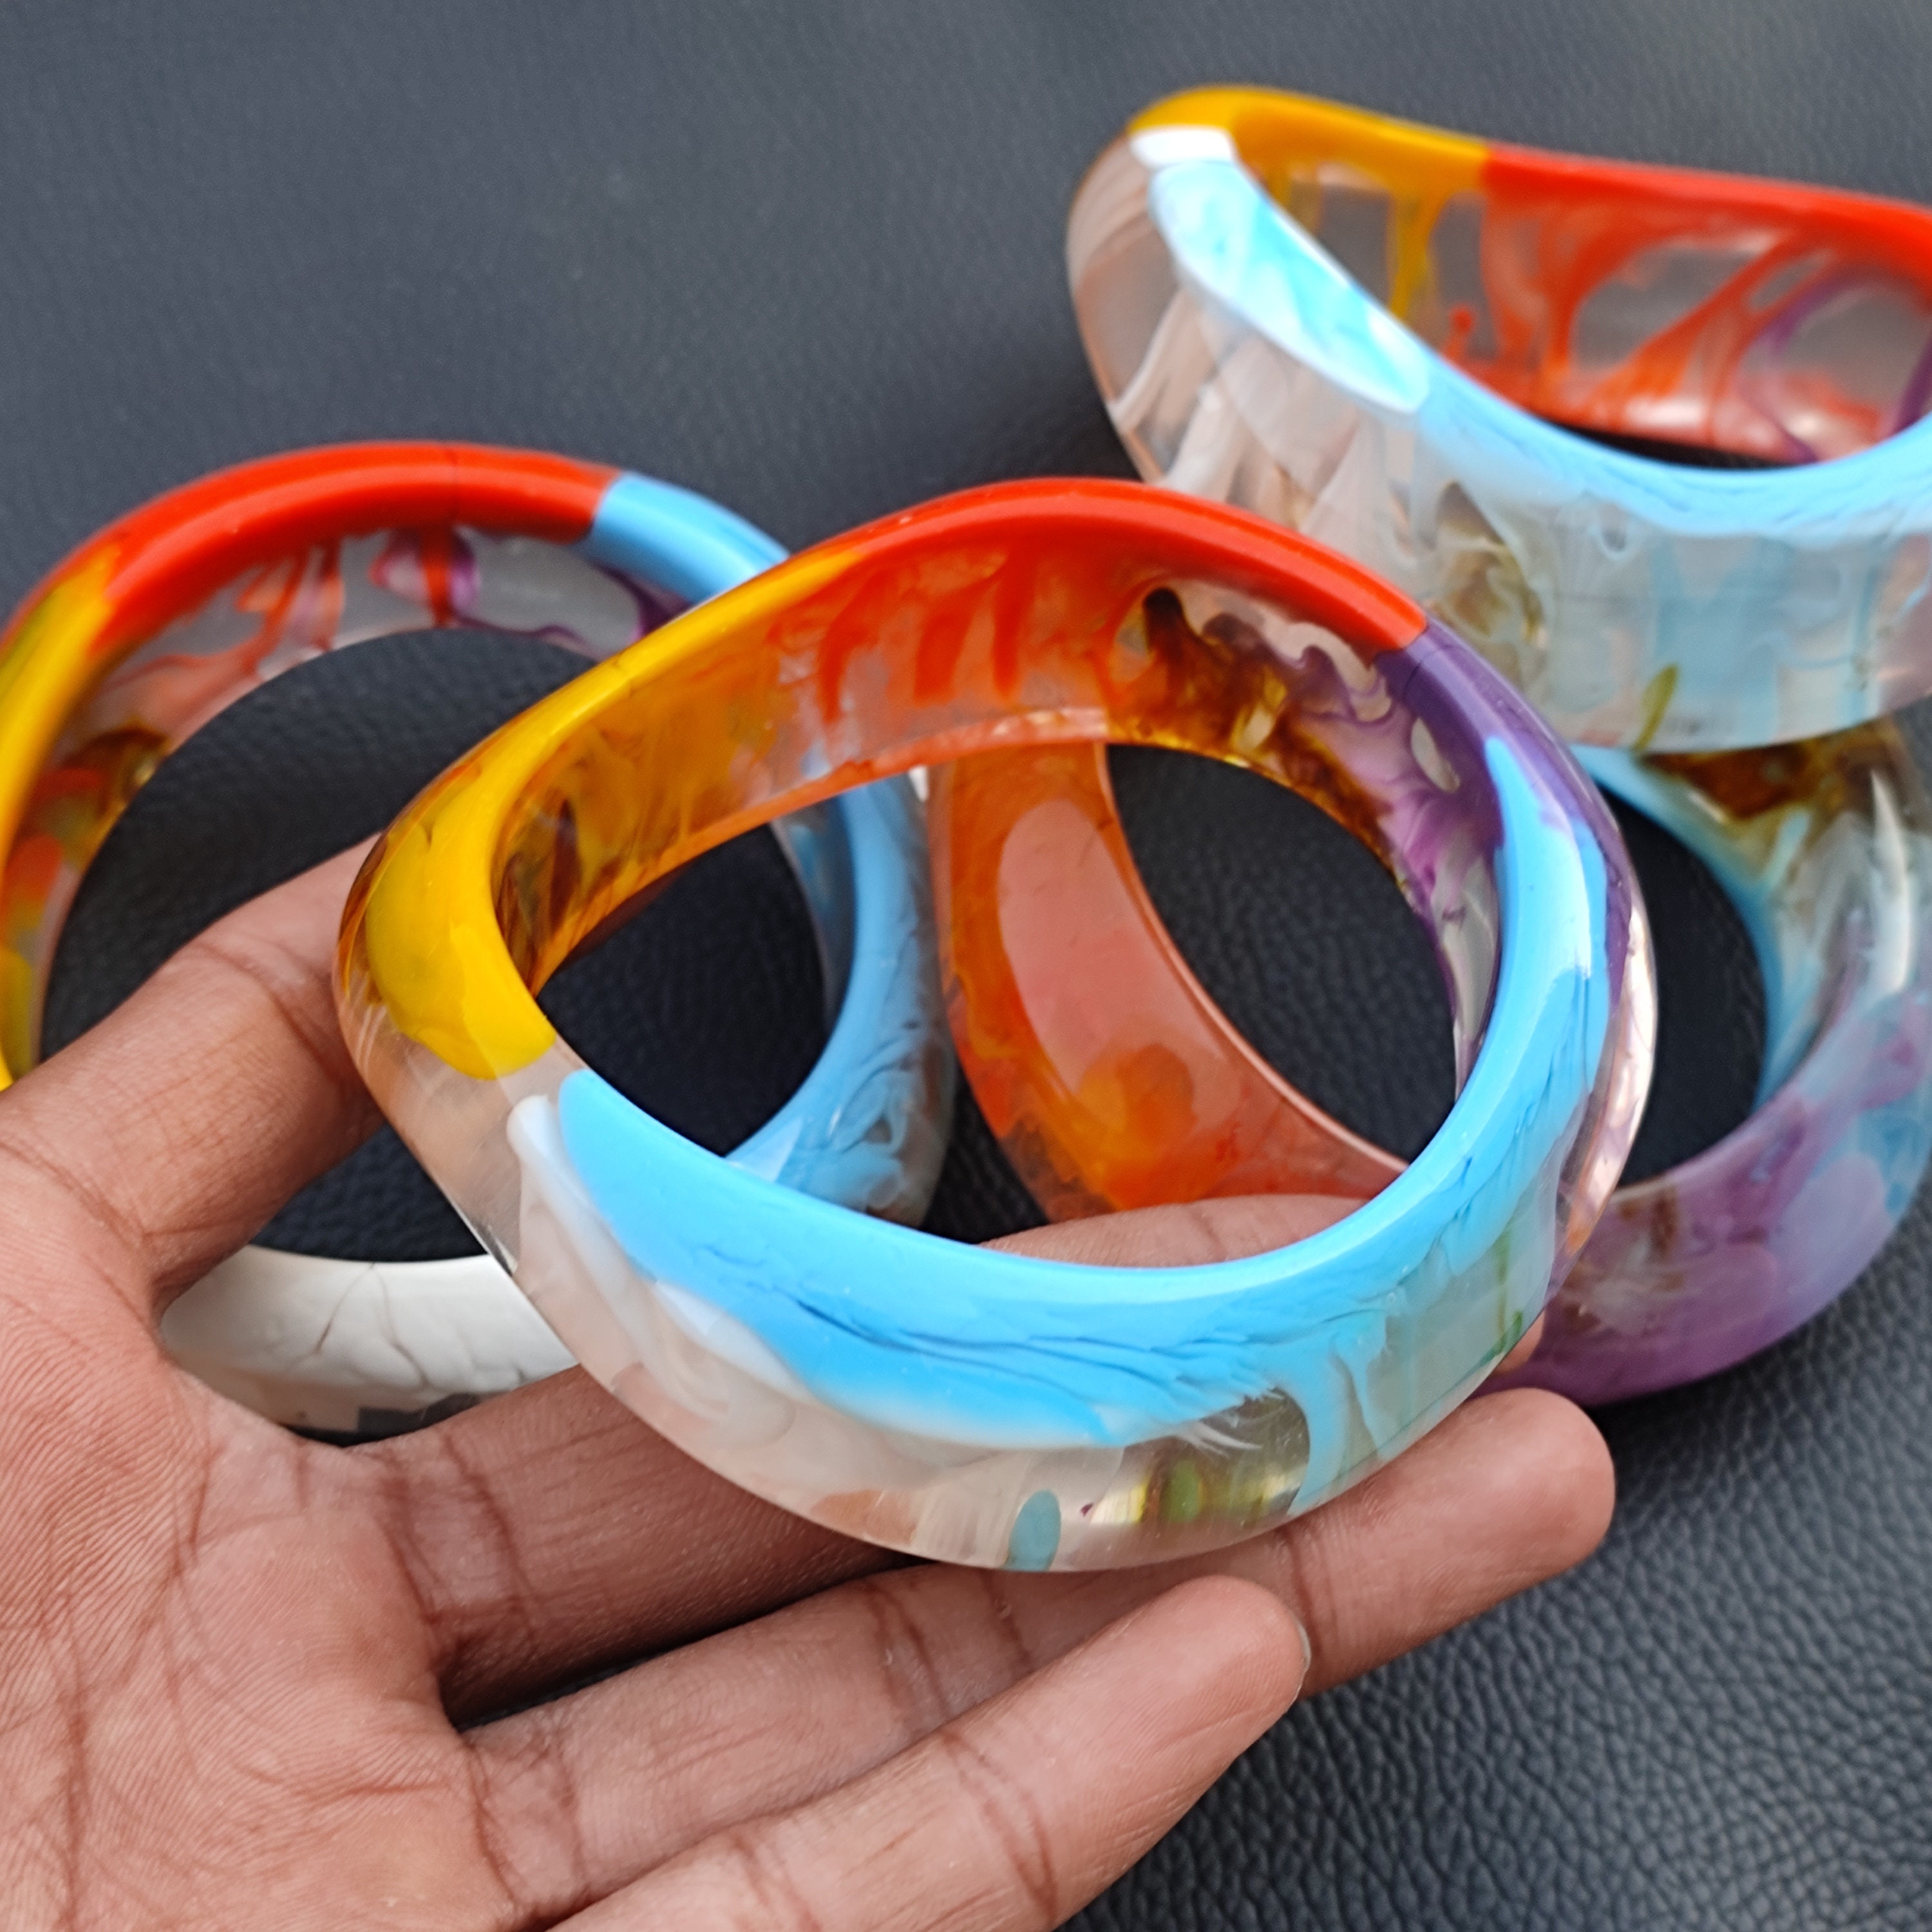 Buy Resin Bangle Online In India - Etsy India